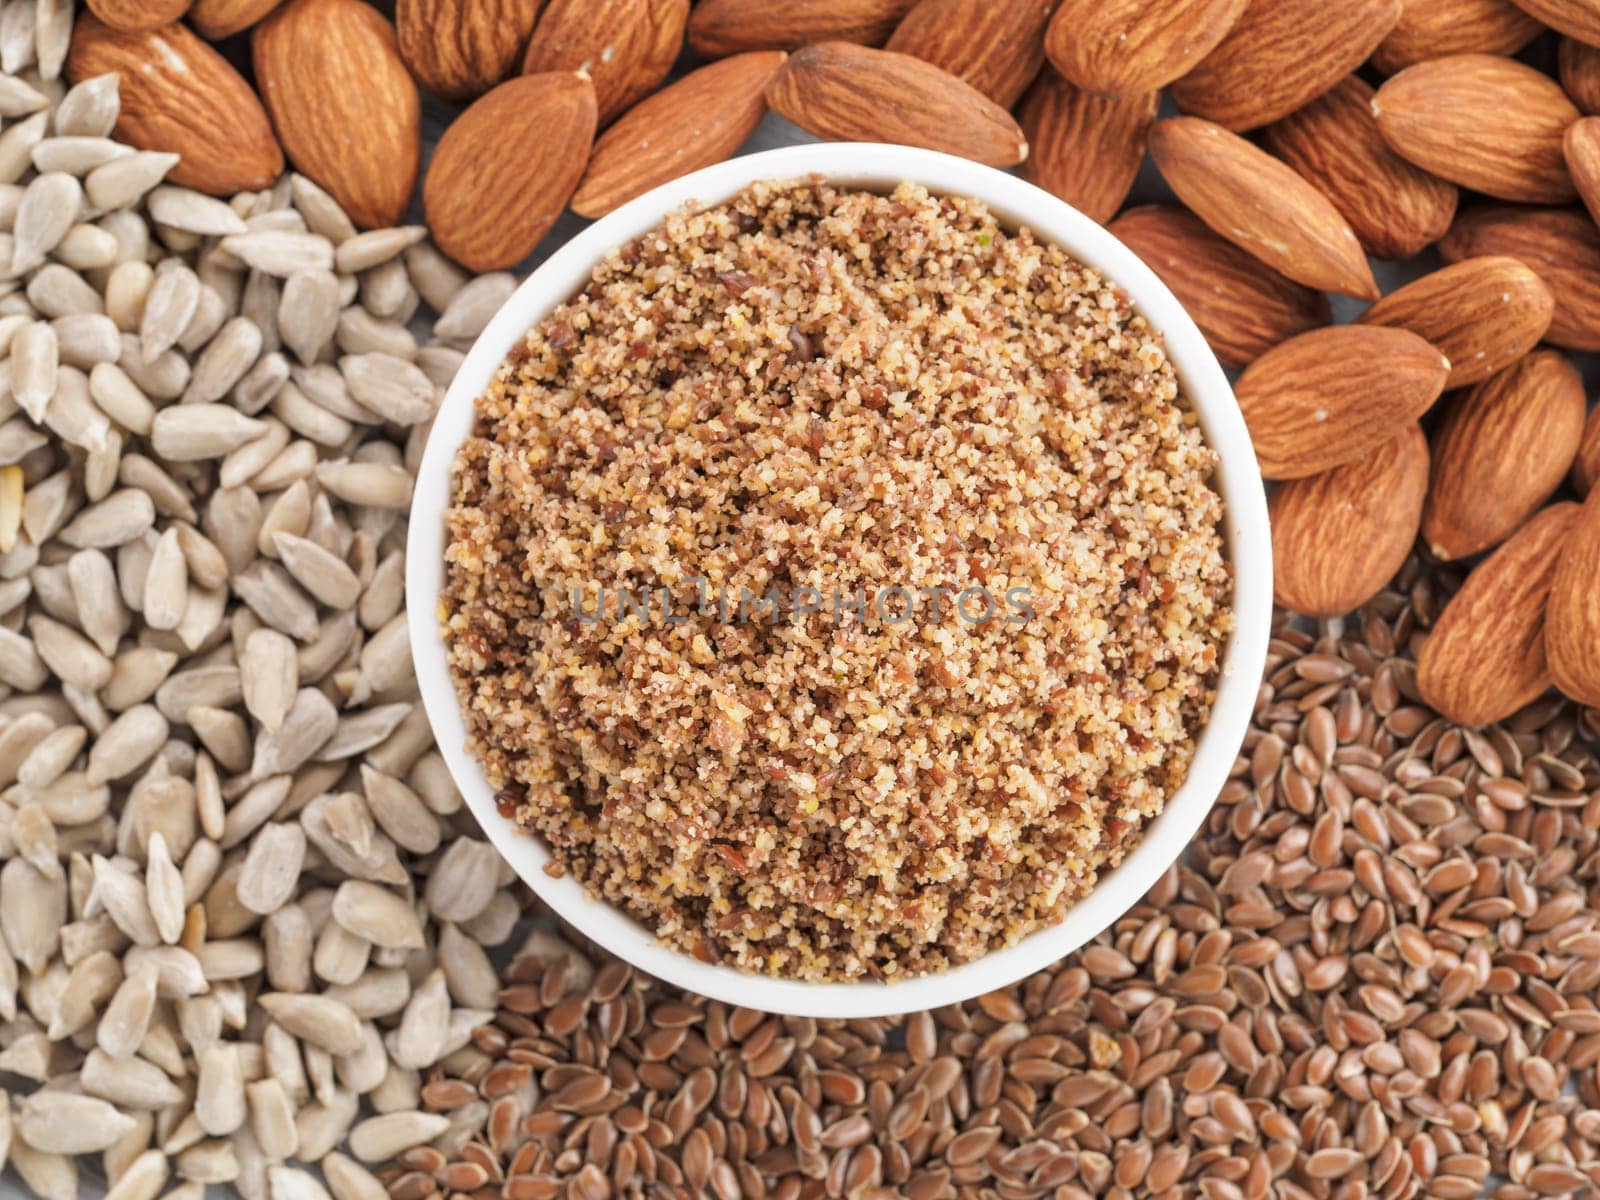 Homemade LSA mix in plate - Linseed or flax seeds, Sunflower seeds and Almonds. Traditional Australian blend of ground, source of dietary fiber, protein, omega fatty acids.Copy space for text.Top view